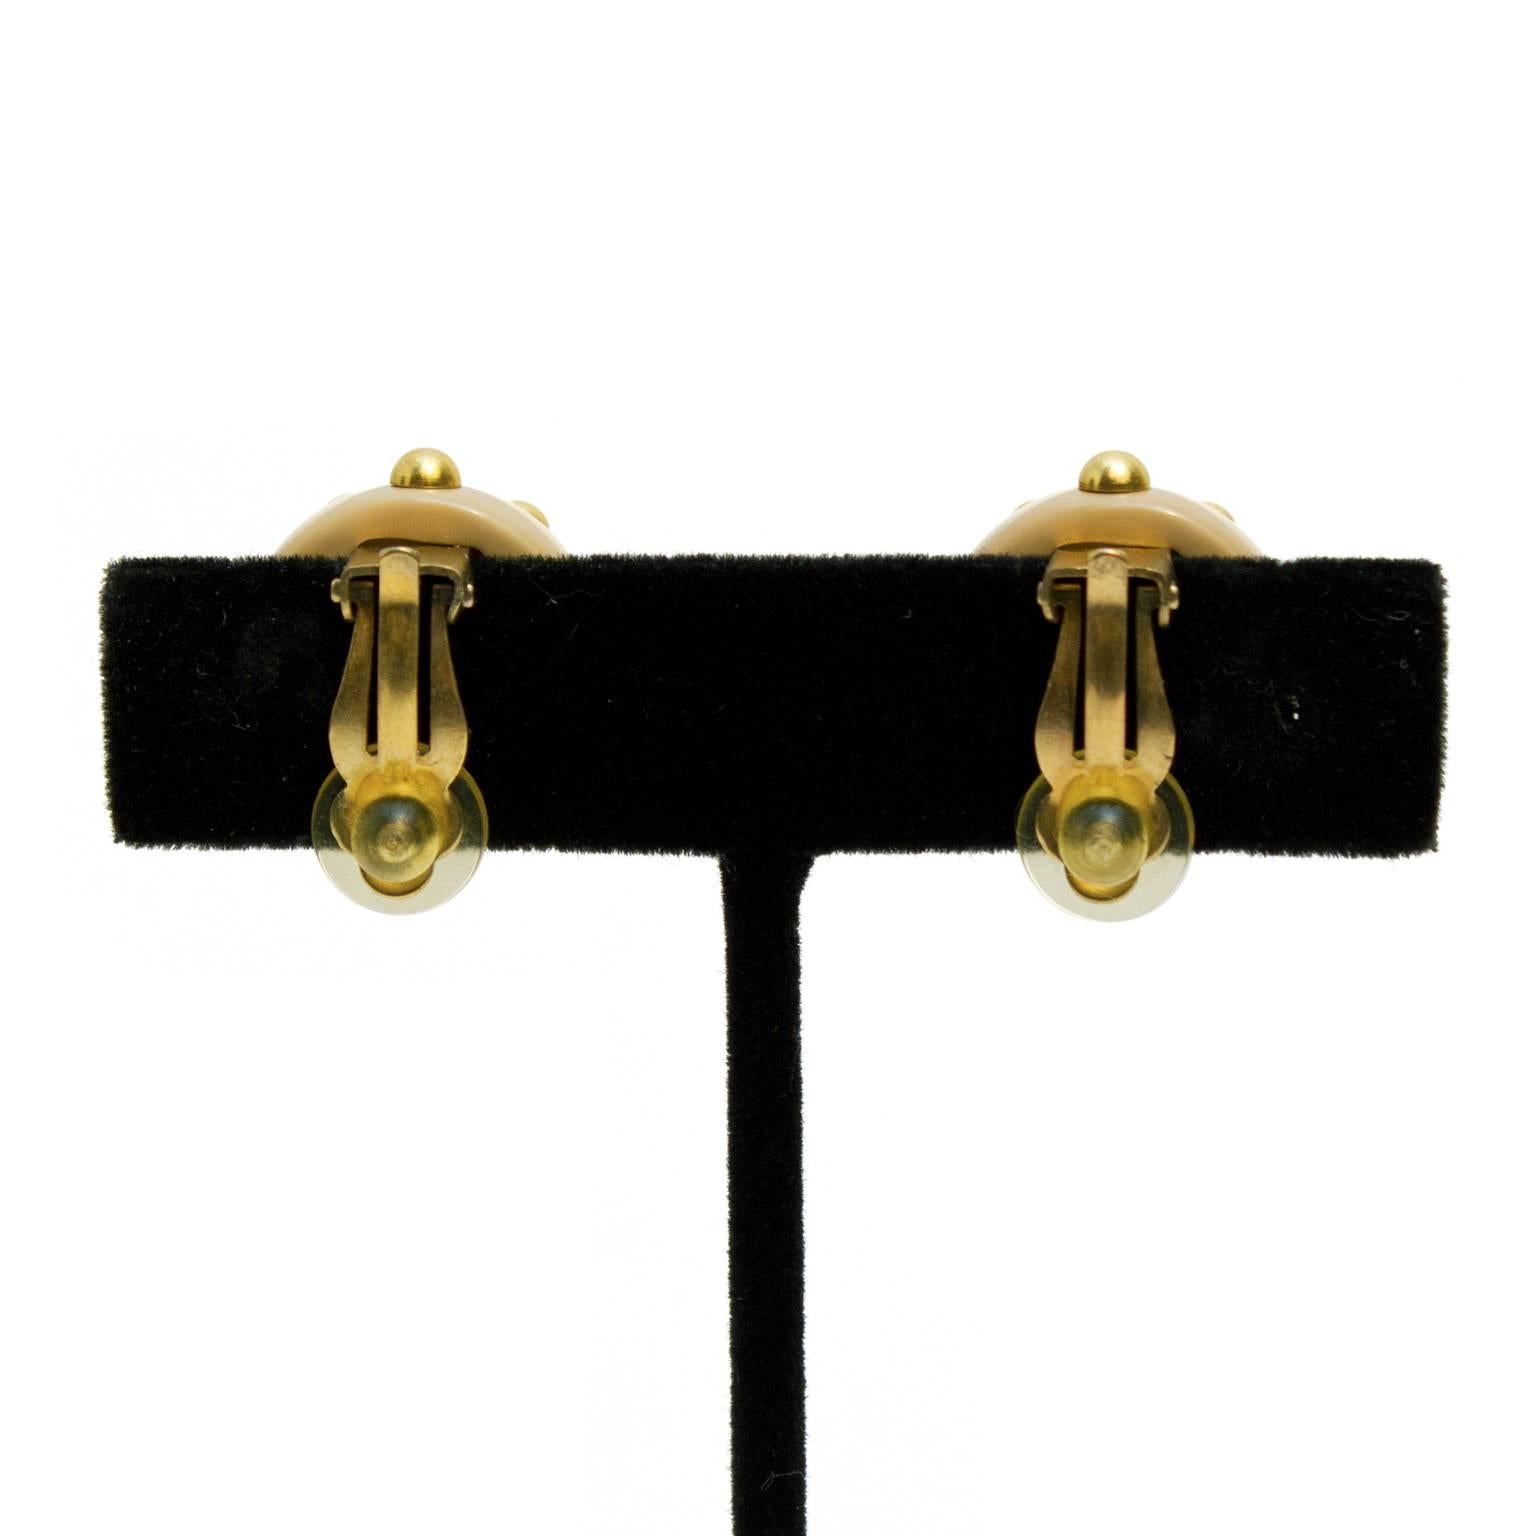 These Chanel clip-on earrings from the Autumn 2000 collection are beige resin with gold tone studs, and a small CC logo in the center. Stamped with Chanel A 00 on the back. Excellent vintage condition.

